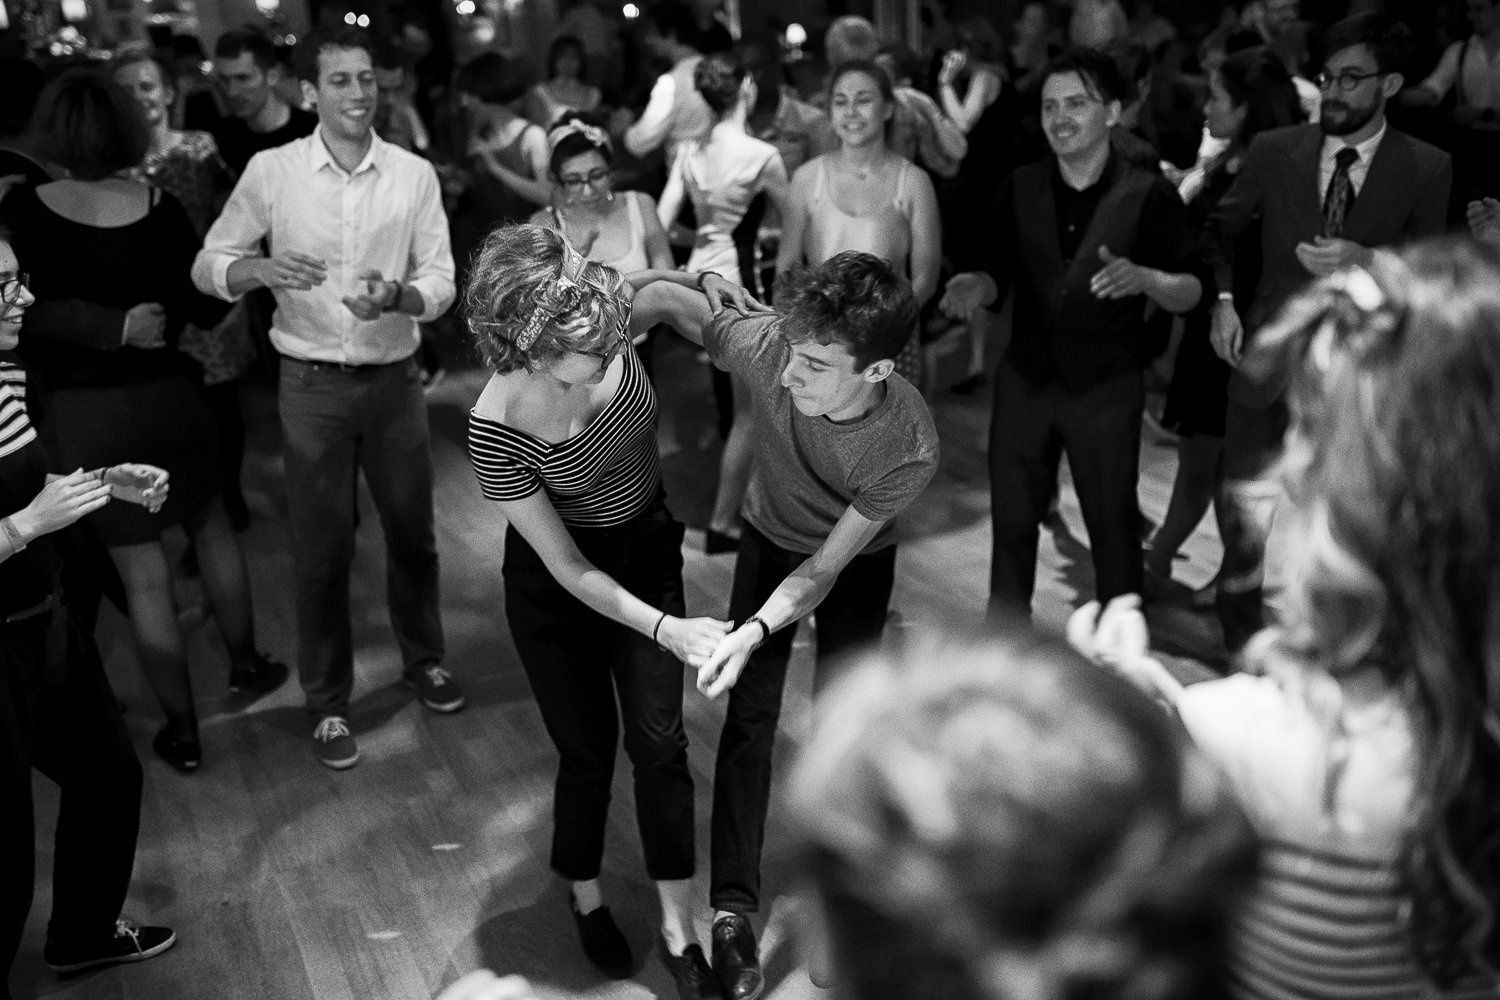  Bal Swing au Chalet du Lac - http://www.ebobrie.com/shake-that-swing-parties / https://www.facebook.com/photosForDancersOnly 